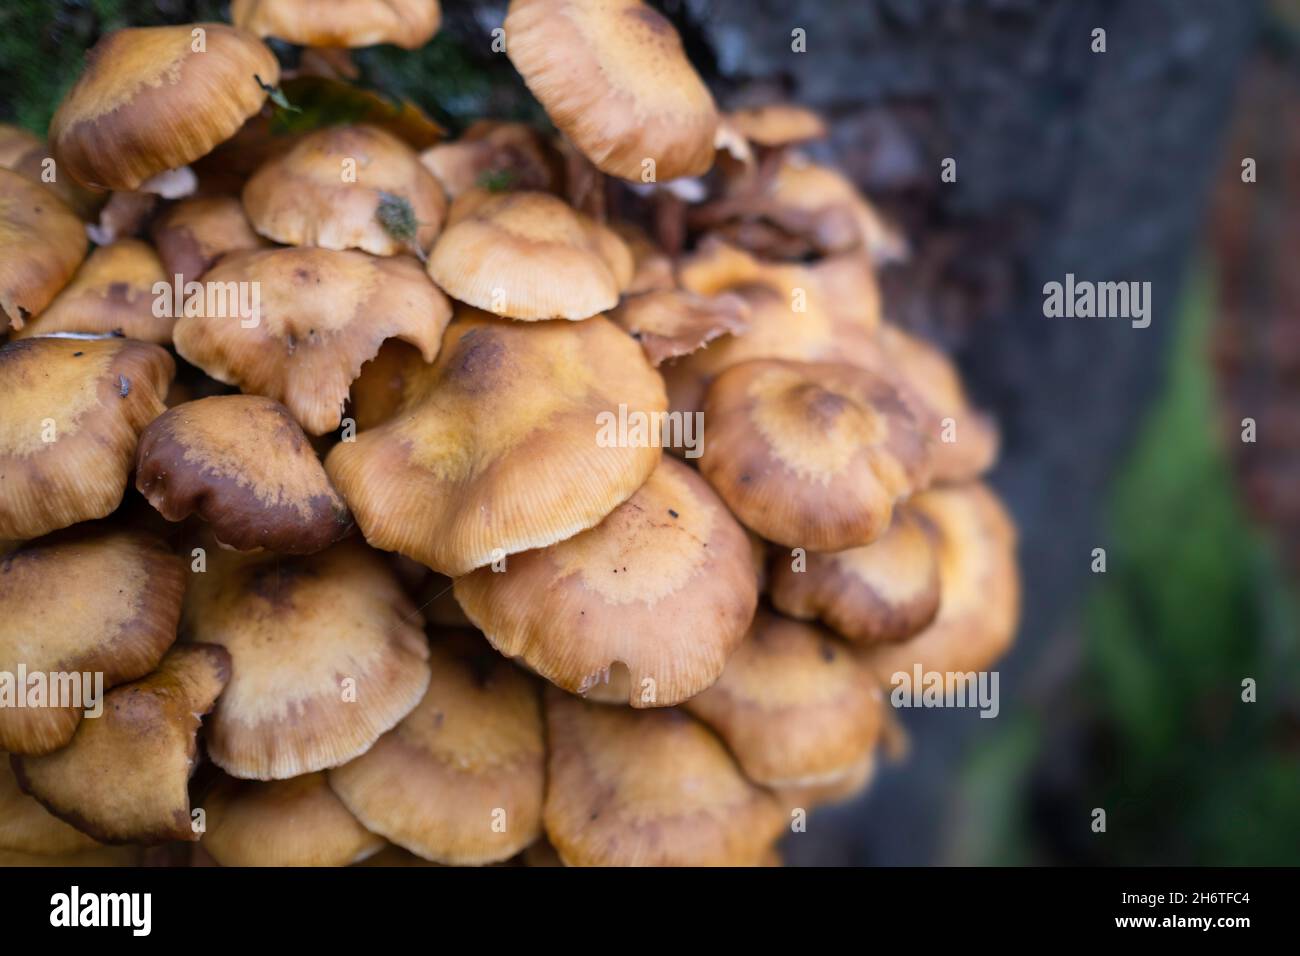 Armillaria mellea or honey fungi that live on trees and woody shrubs. Armillaria can be a destructive forest pathogen, it causes 'white rot' root dise Stock Photo